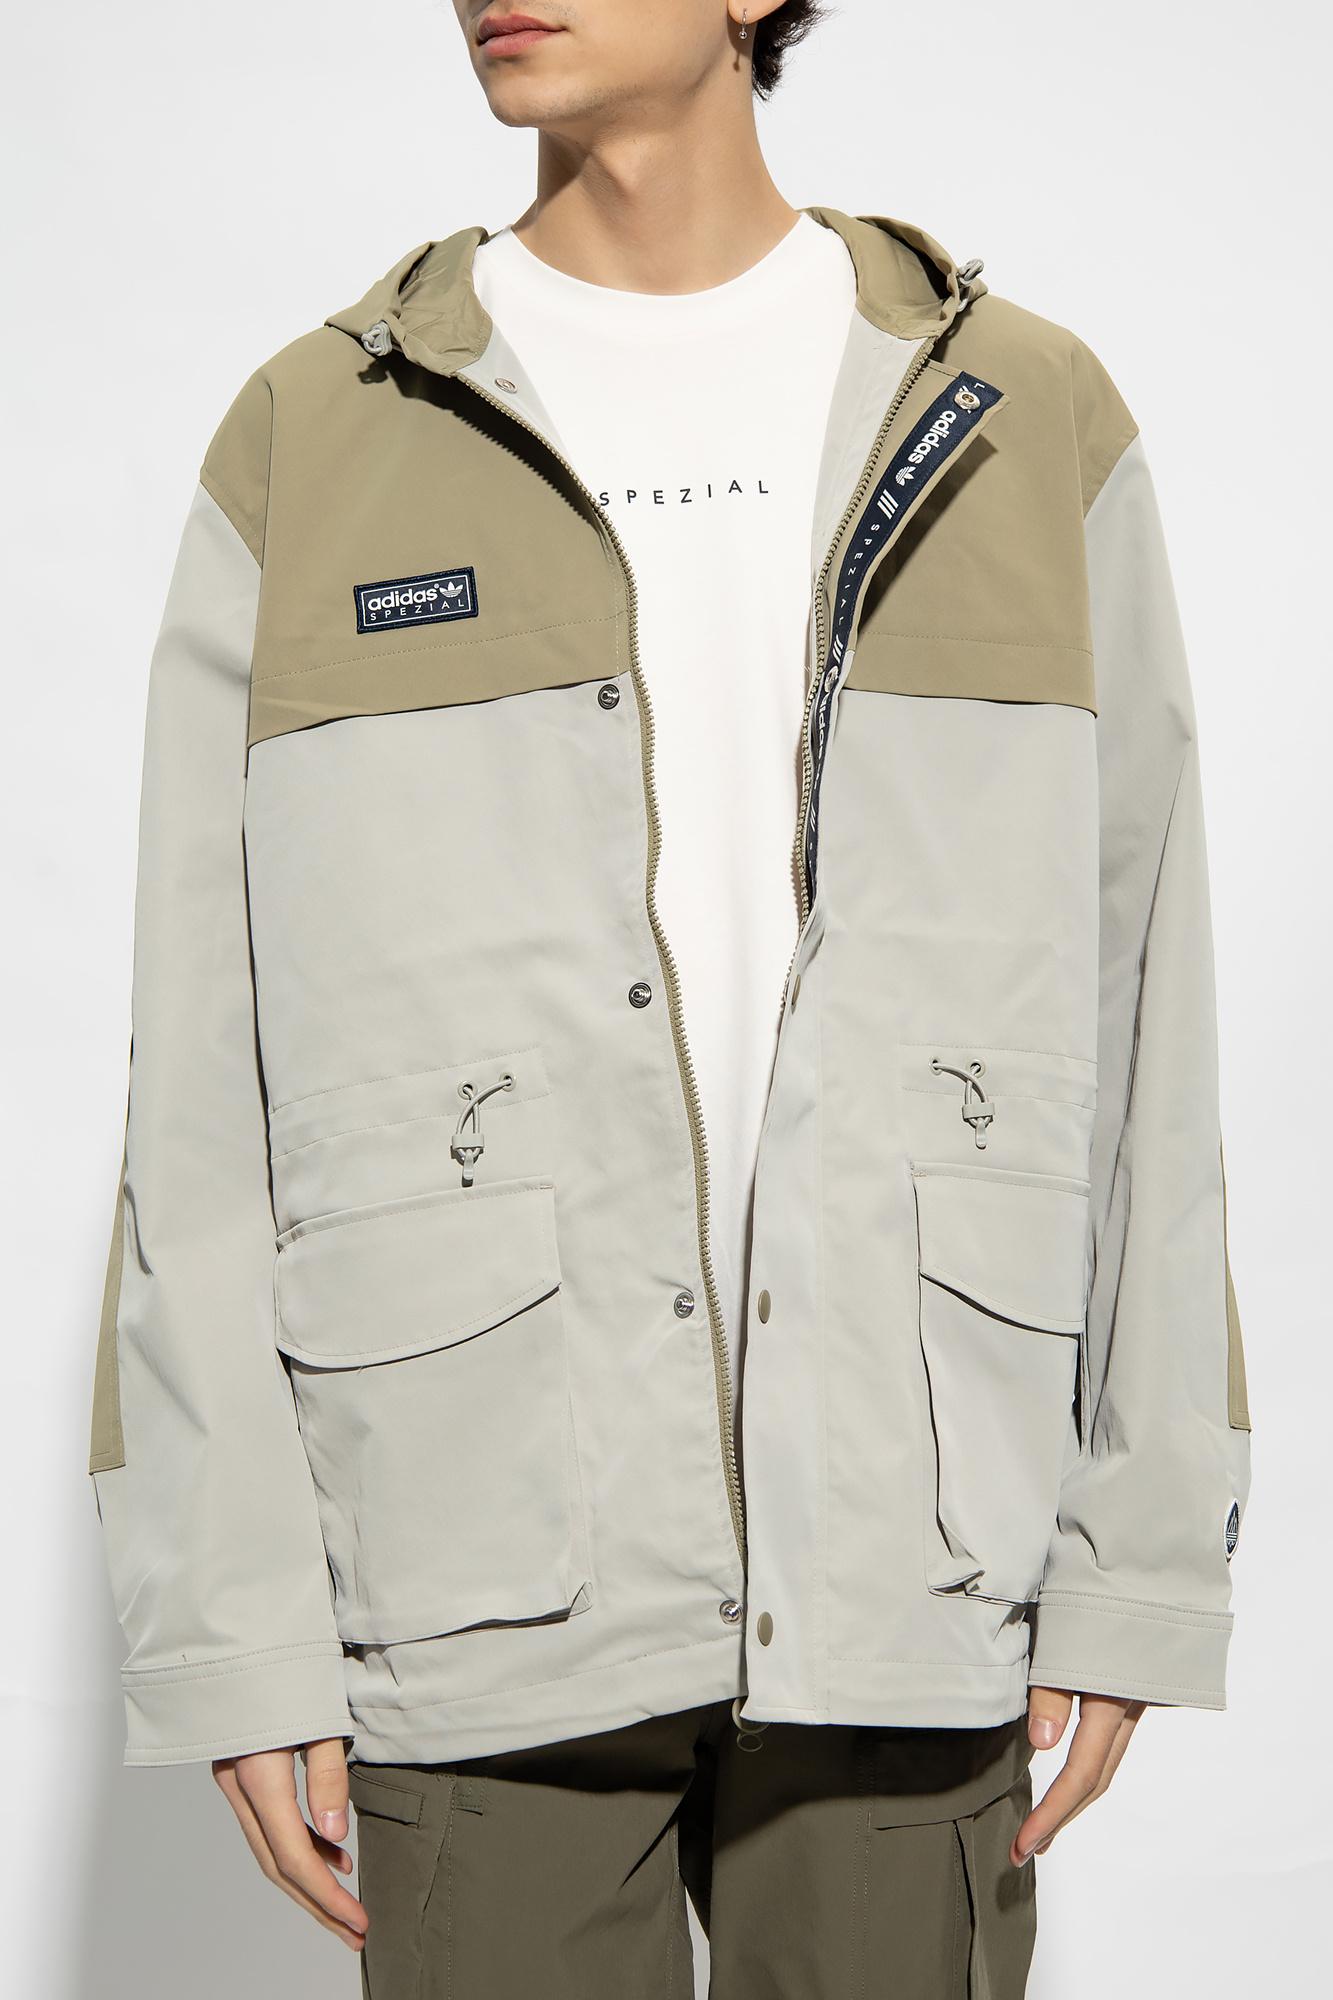 adidas Originals 'Spezial' Collection Jacket, ' in Natural for Men | Lyst